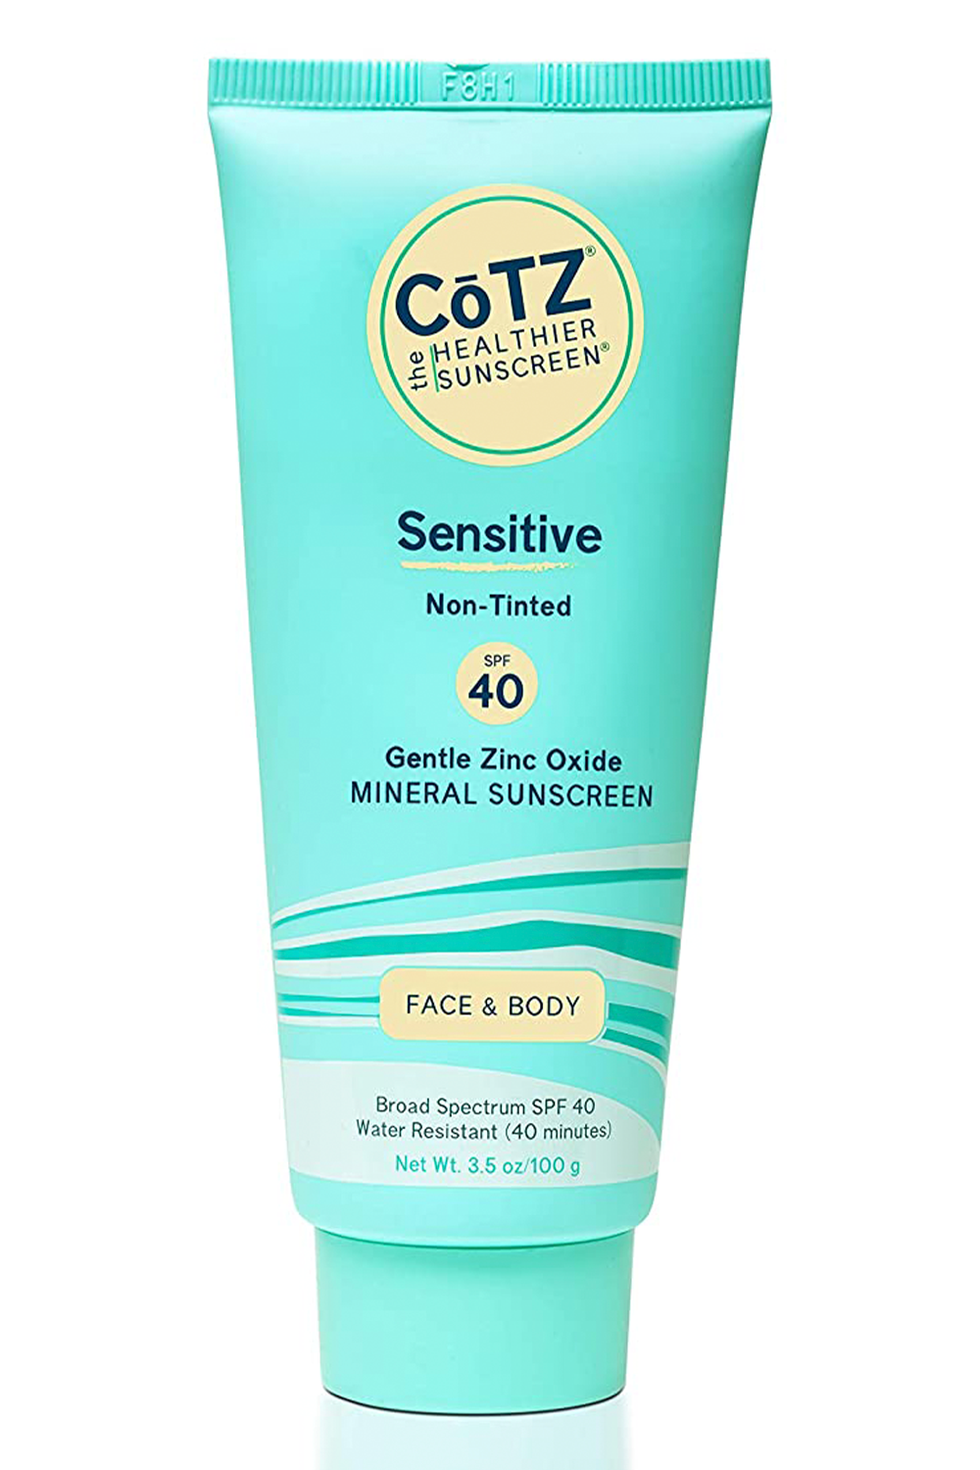 CoTZ Sensitive Non-Tinted Zinc Oxide Mineral Sunscreen for Body and Face Broad Spectrum SPF 40